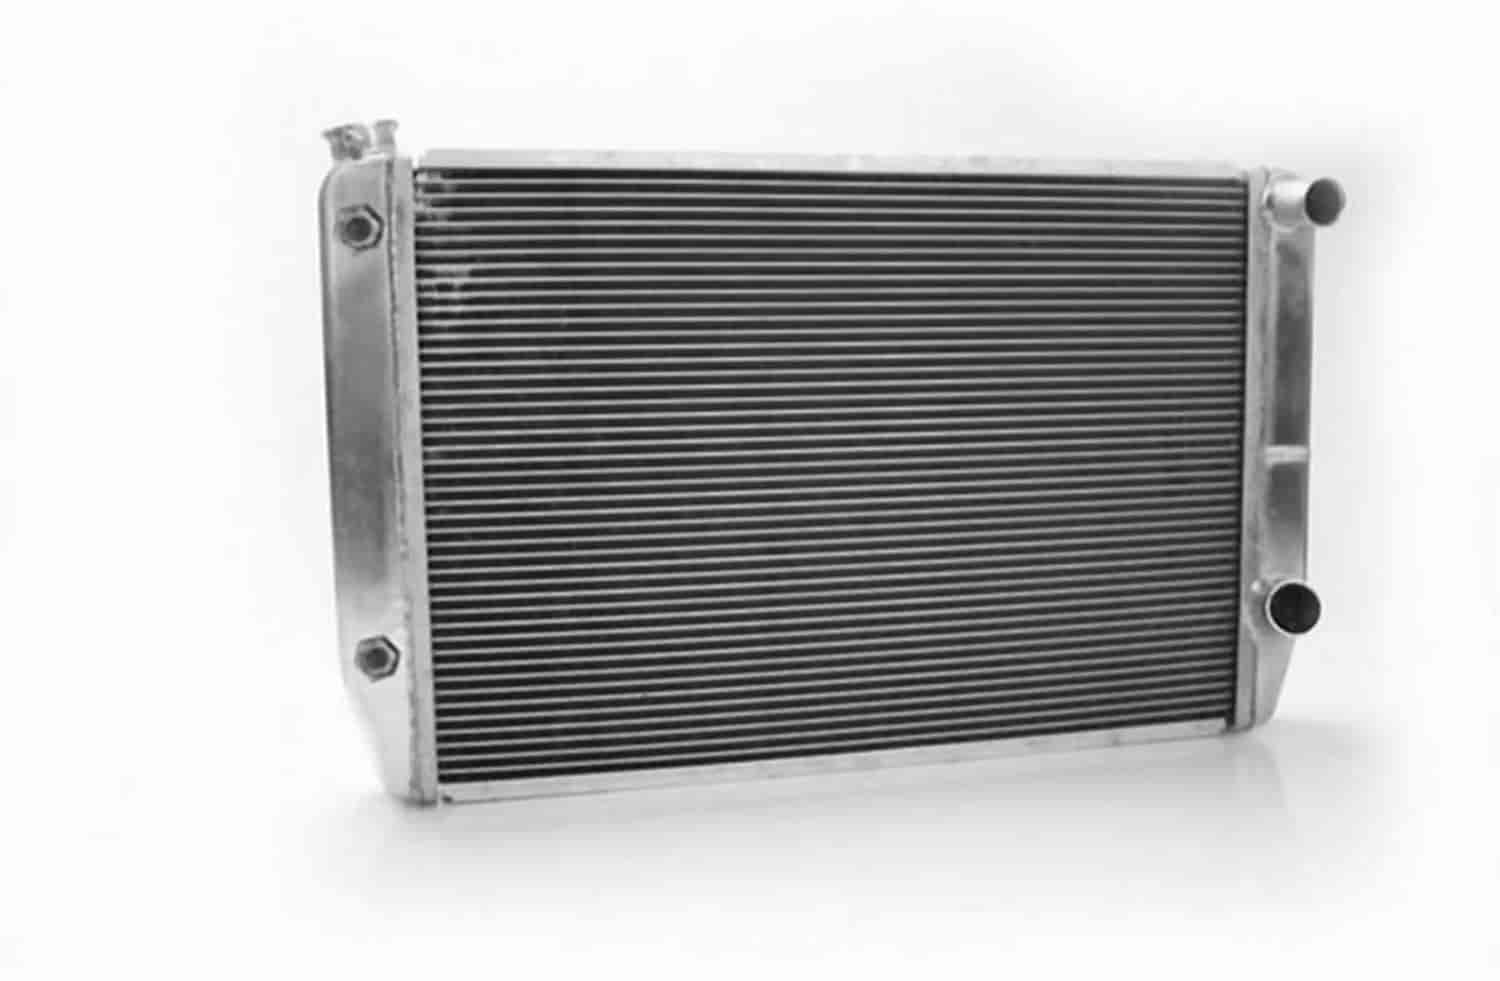 MegaCool Universal Fit Radiator Dual Pass Crossflow Design 31" x 19" with Transmission Cooler